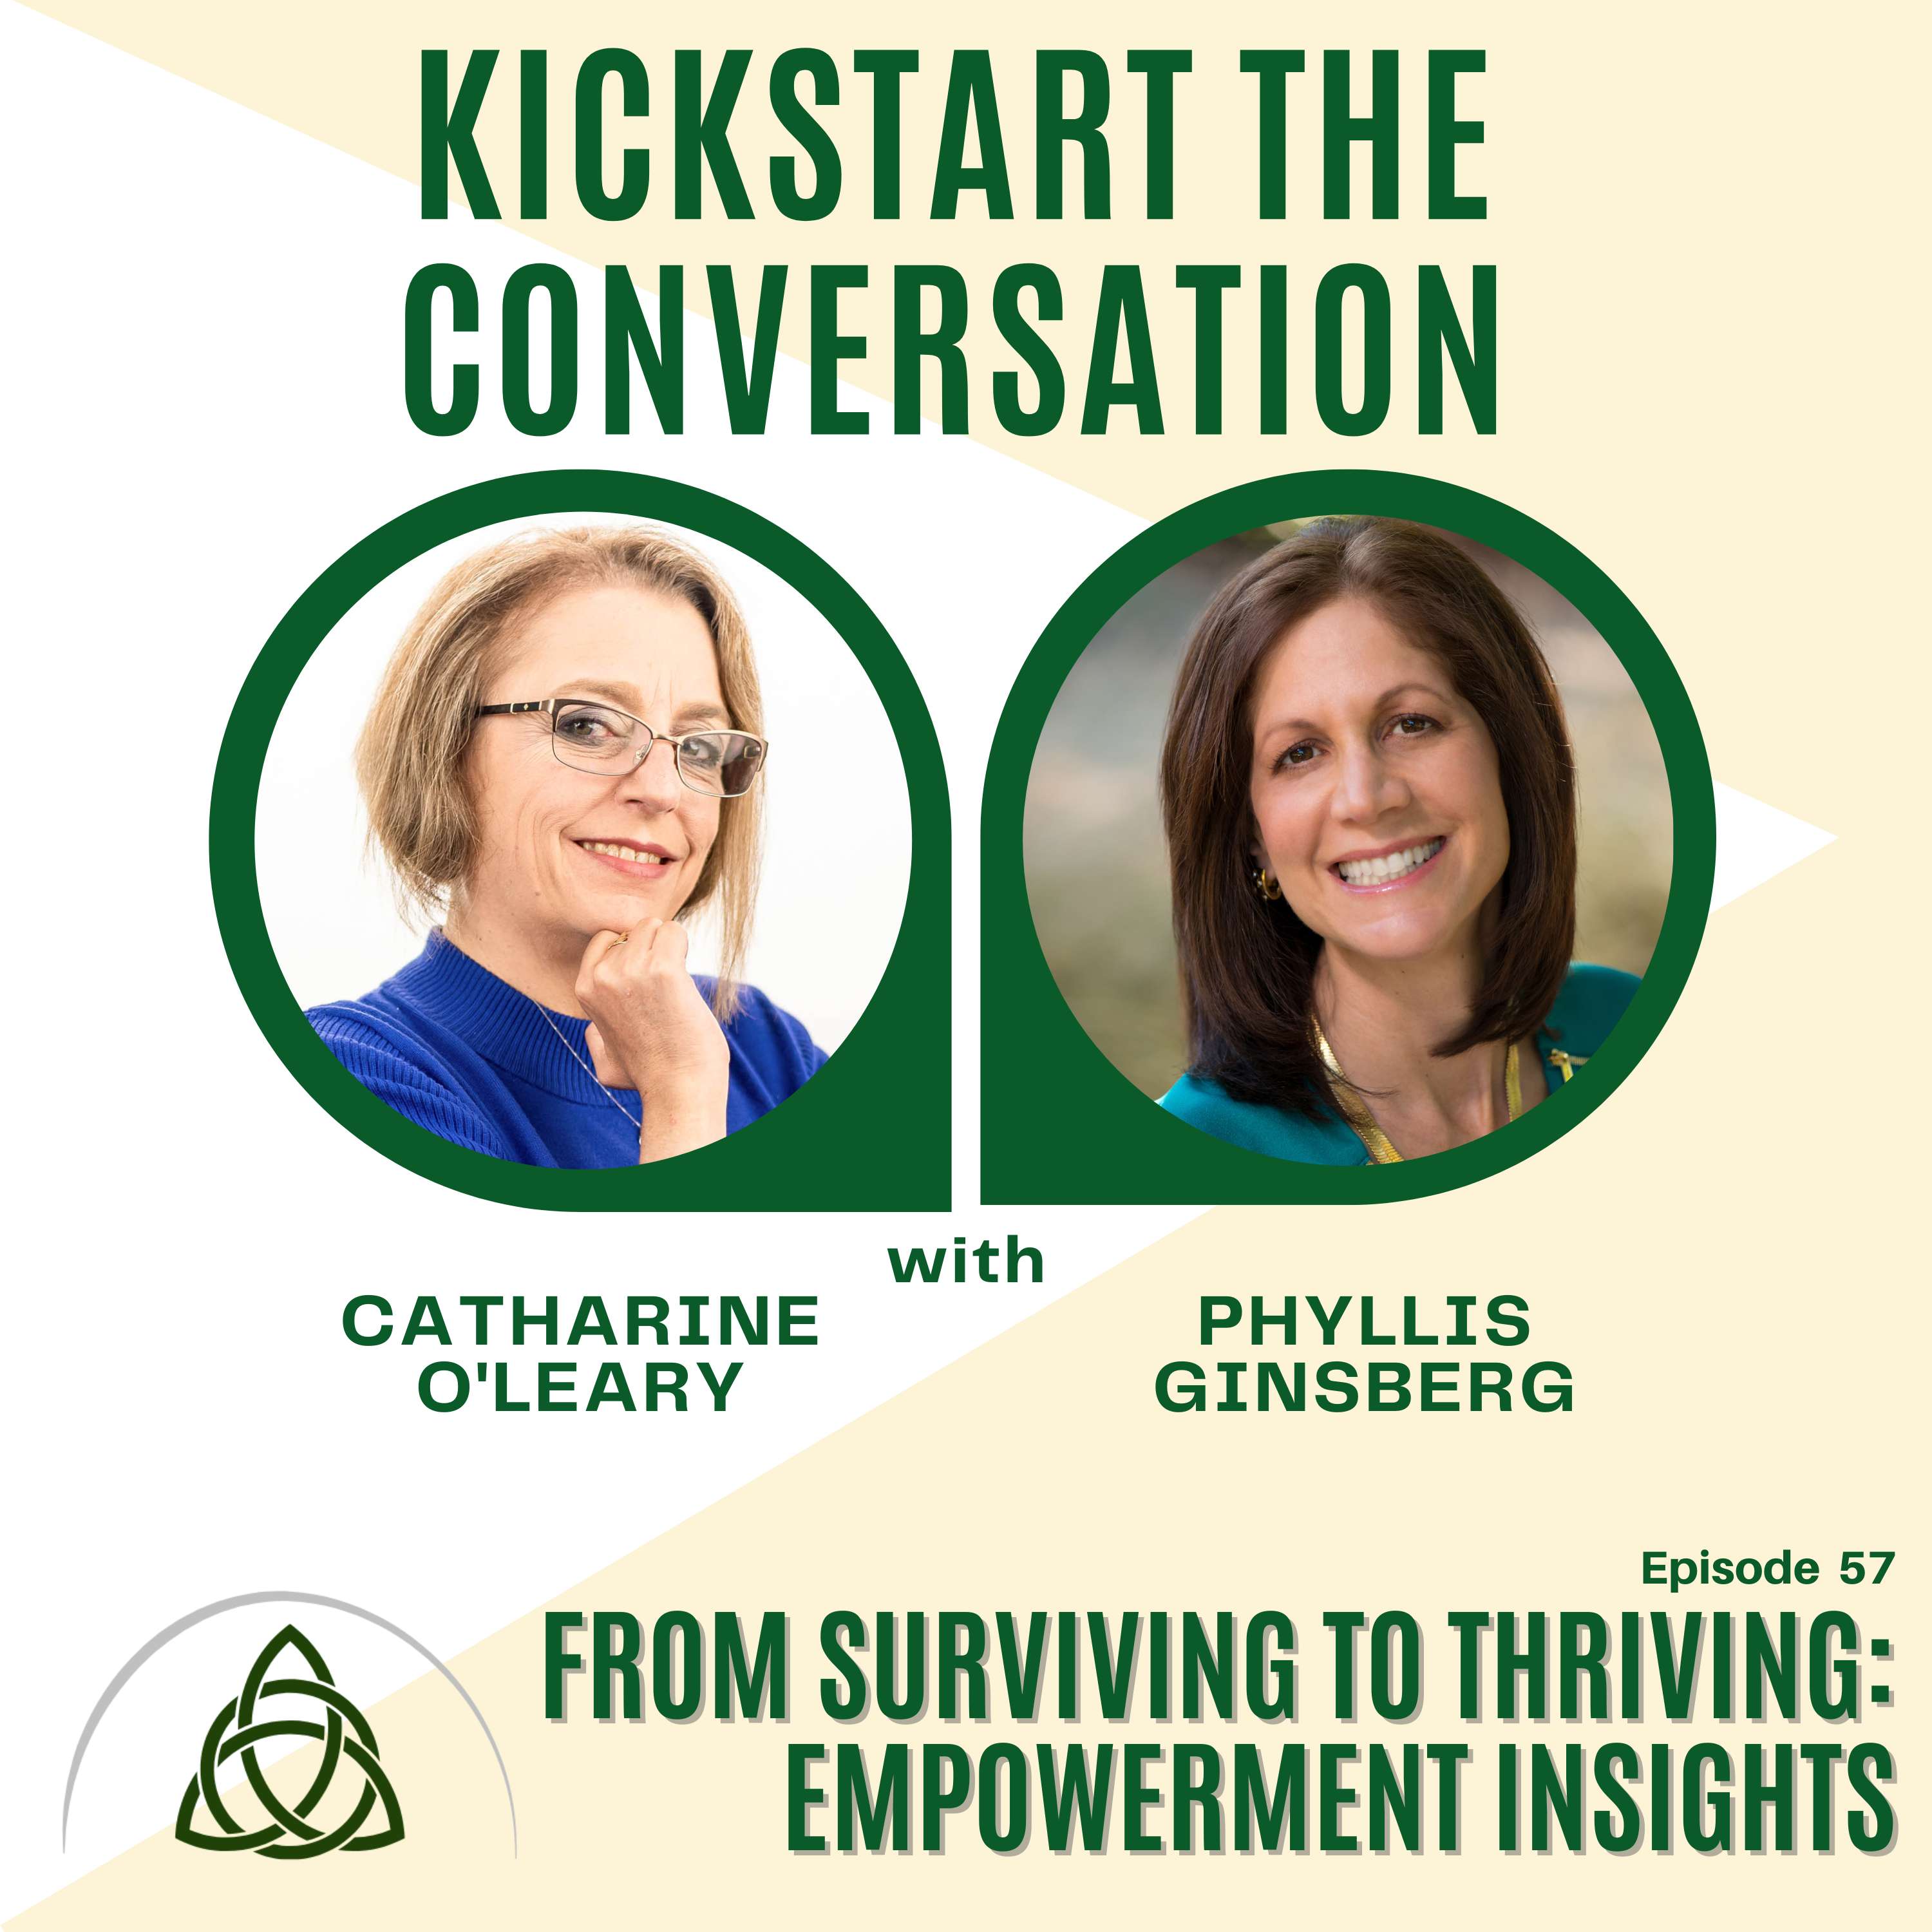 From Surviving to Thriving: Empowerment Insights with Phyllis Ginsberg